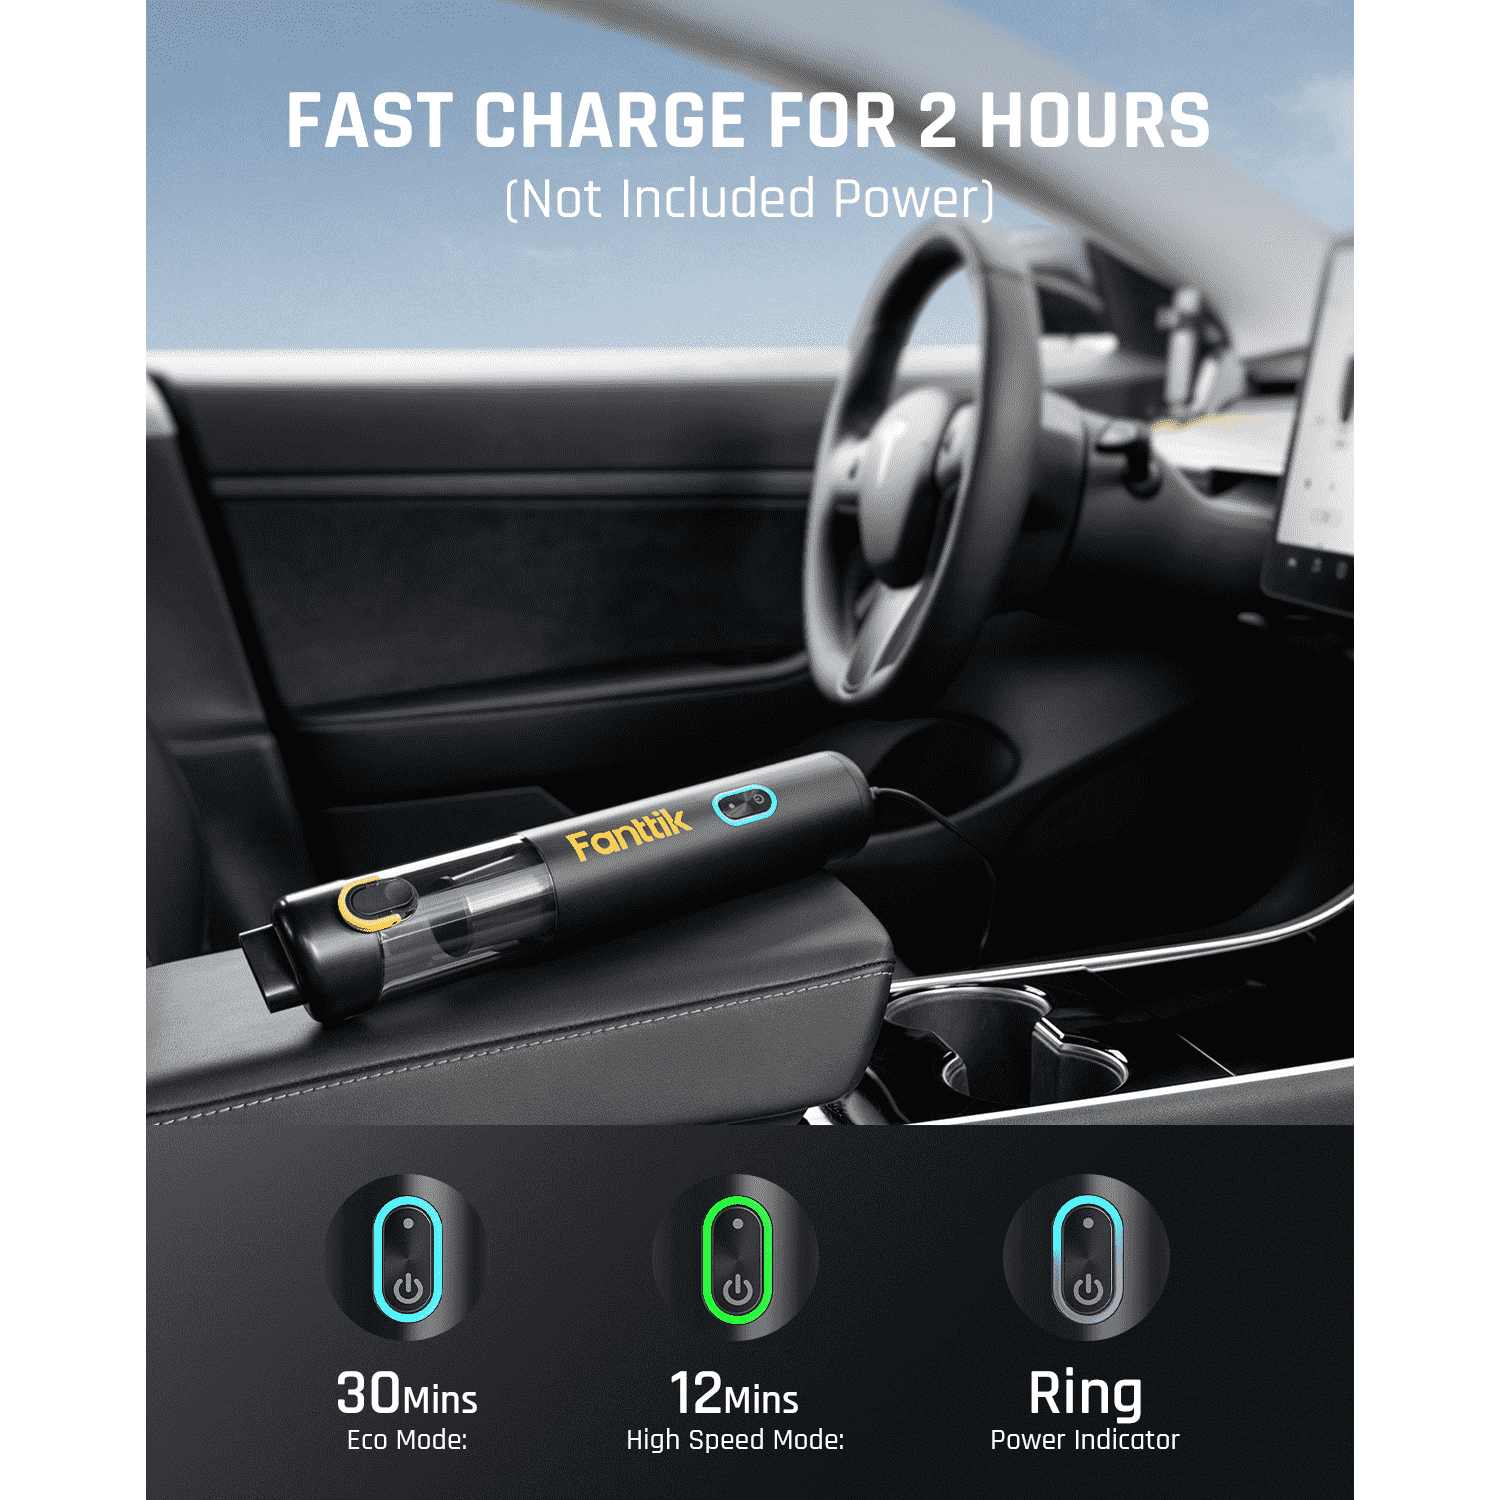 Fanttik V8 Mate Cordless Car Vacuum use the Type-C fast charging cable to charge it anytime, anywhere, and it can be fully charged in as fast as 2 hours.